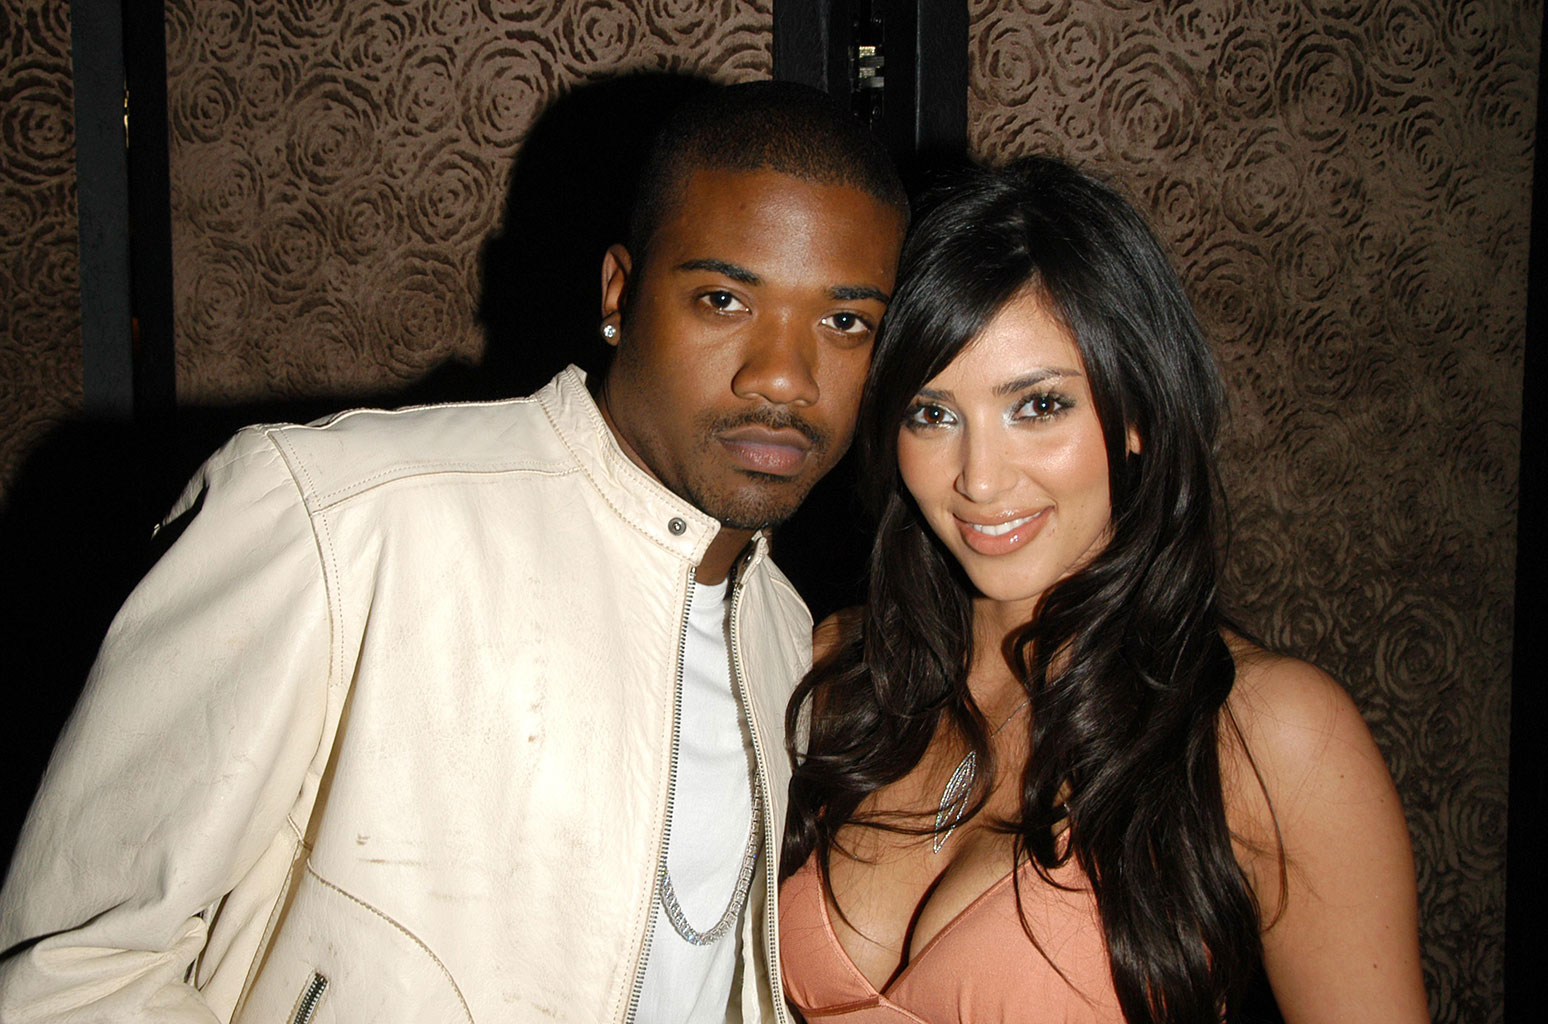 barry schultz recommends ray j and kim kardashian porn pic